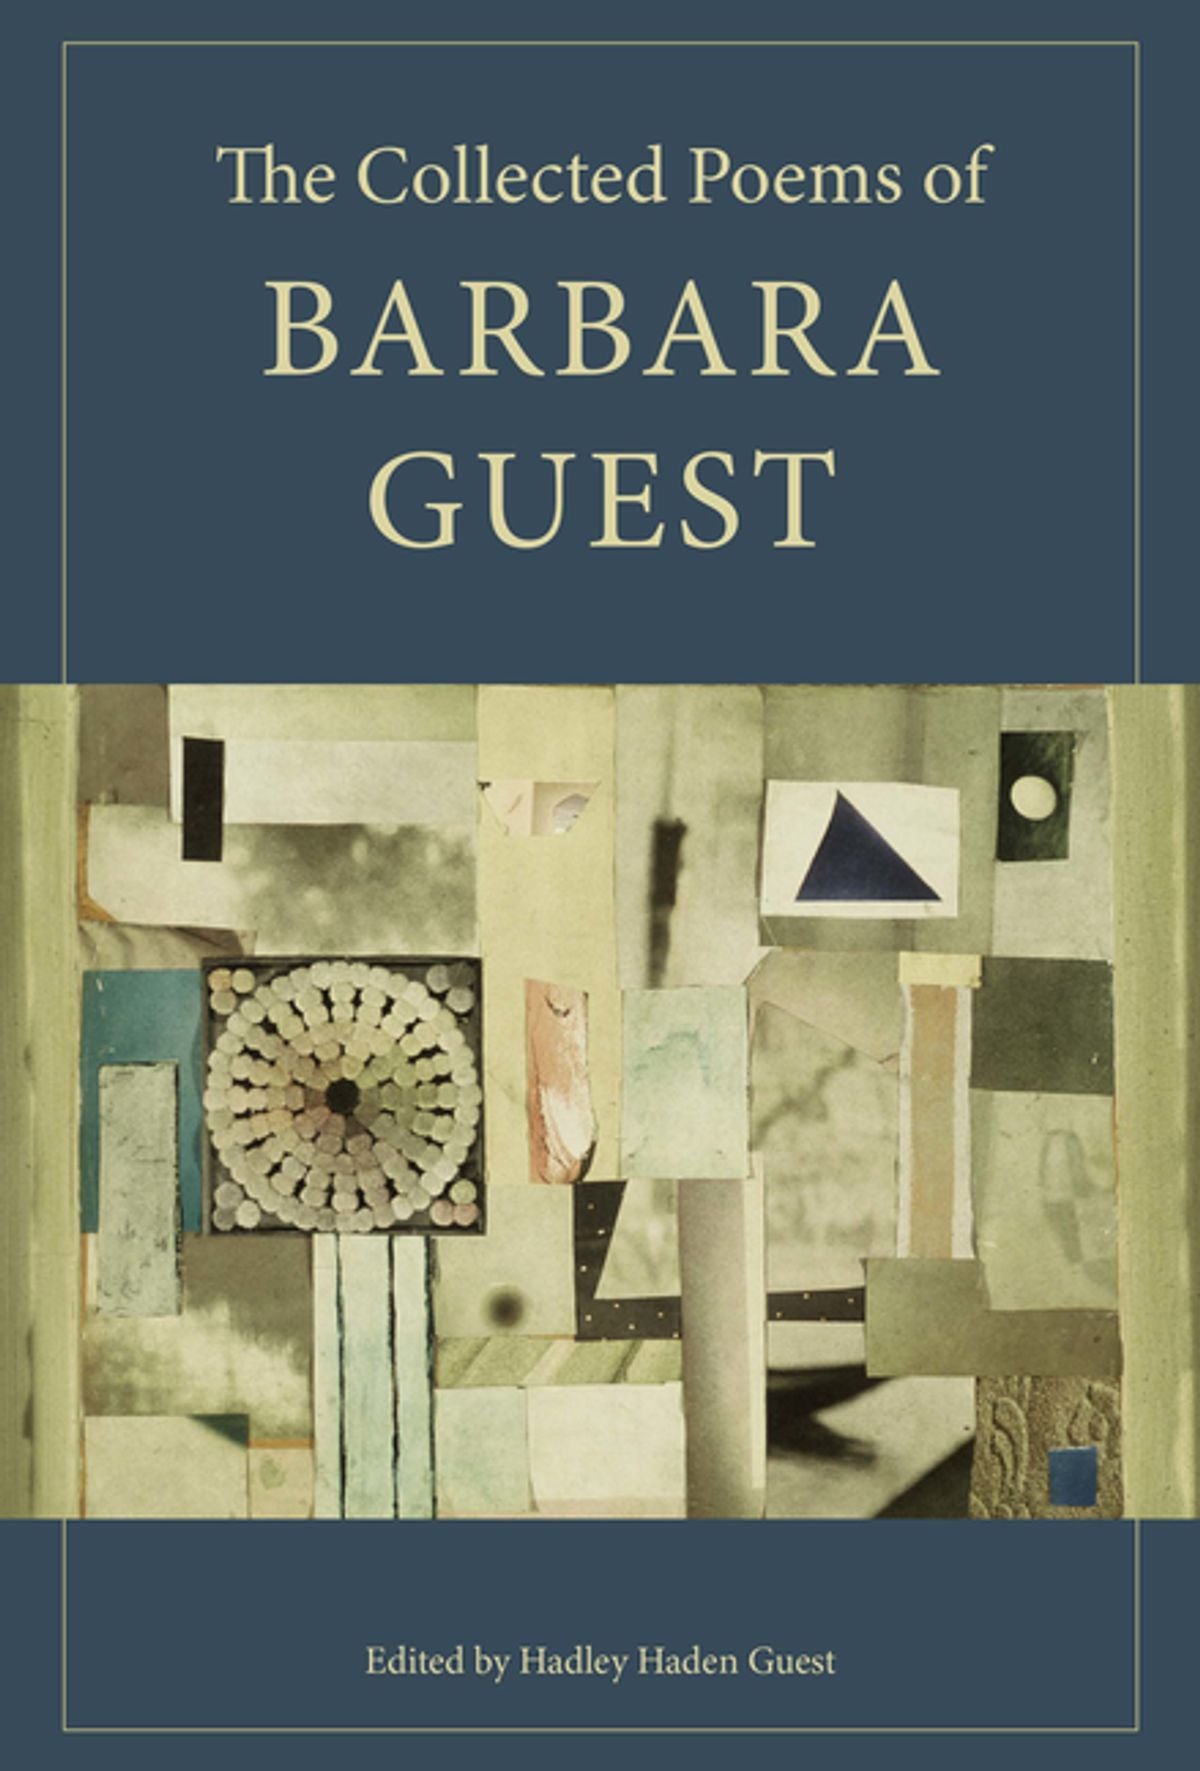 The Collected Poems of Barbara Guest